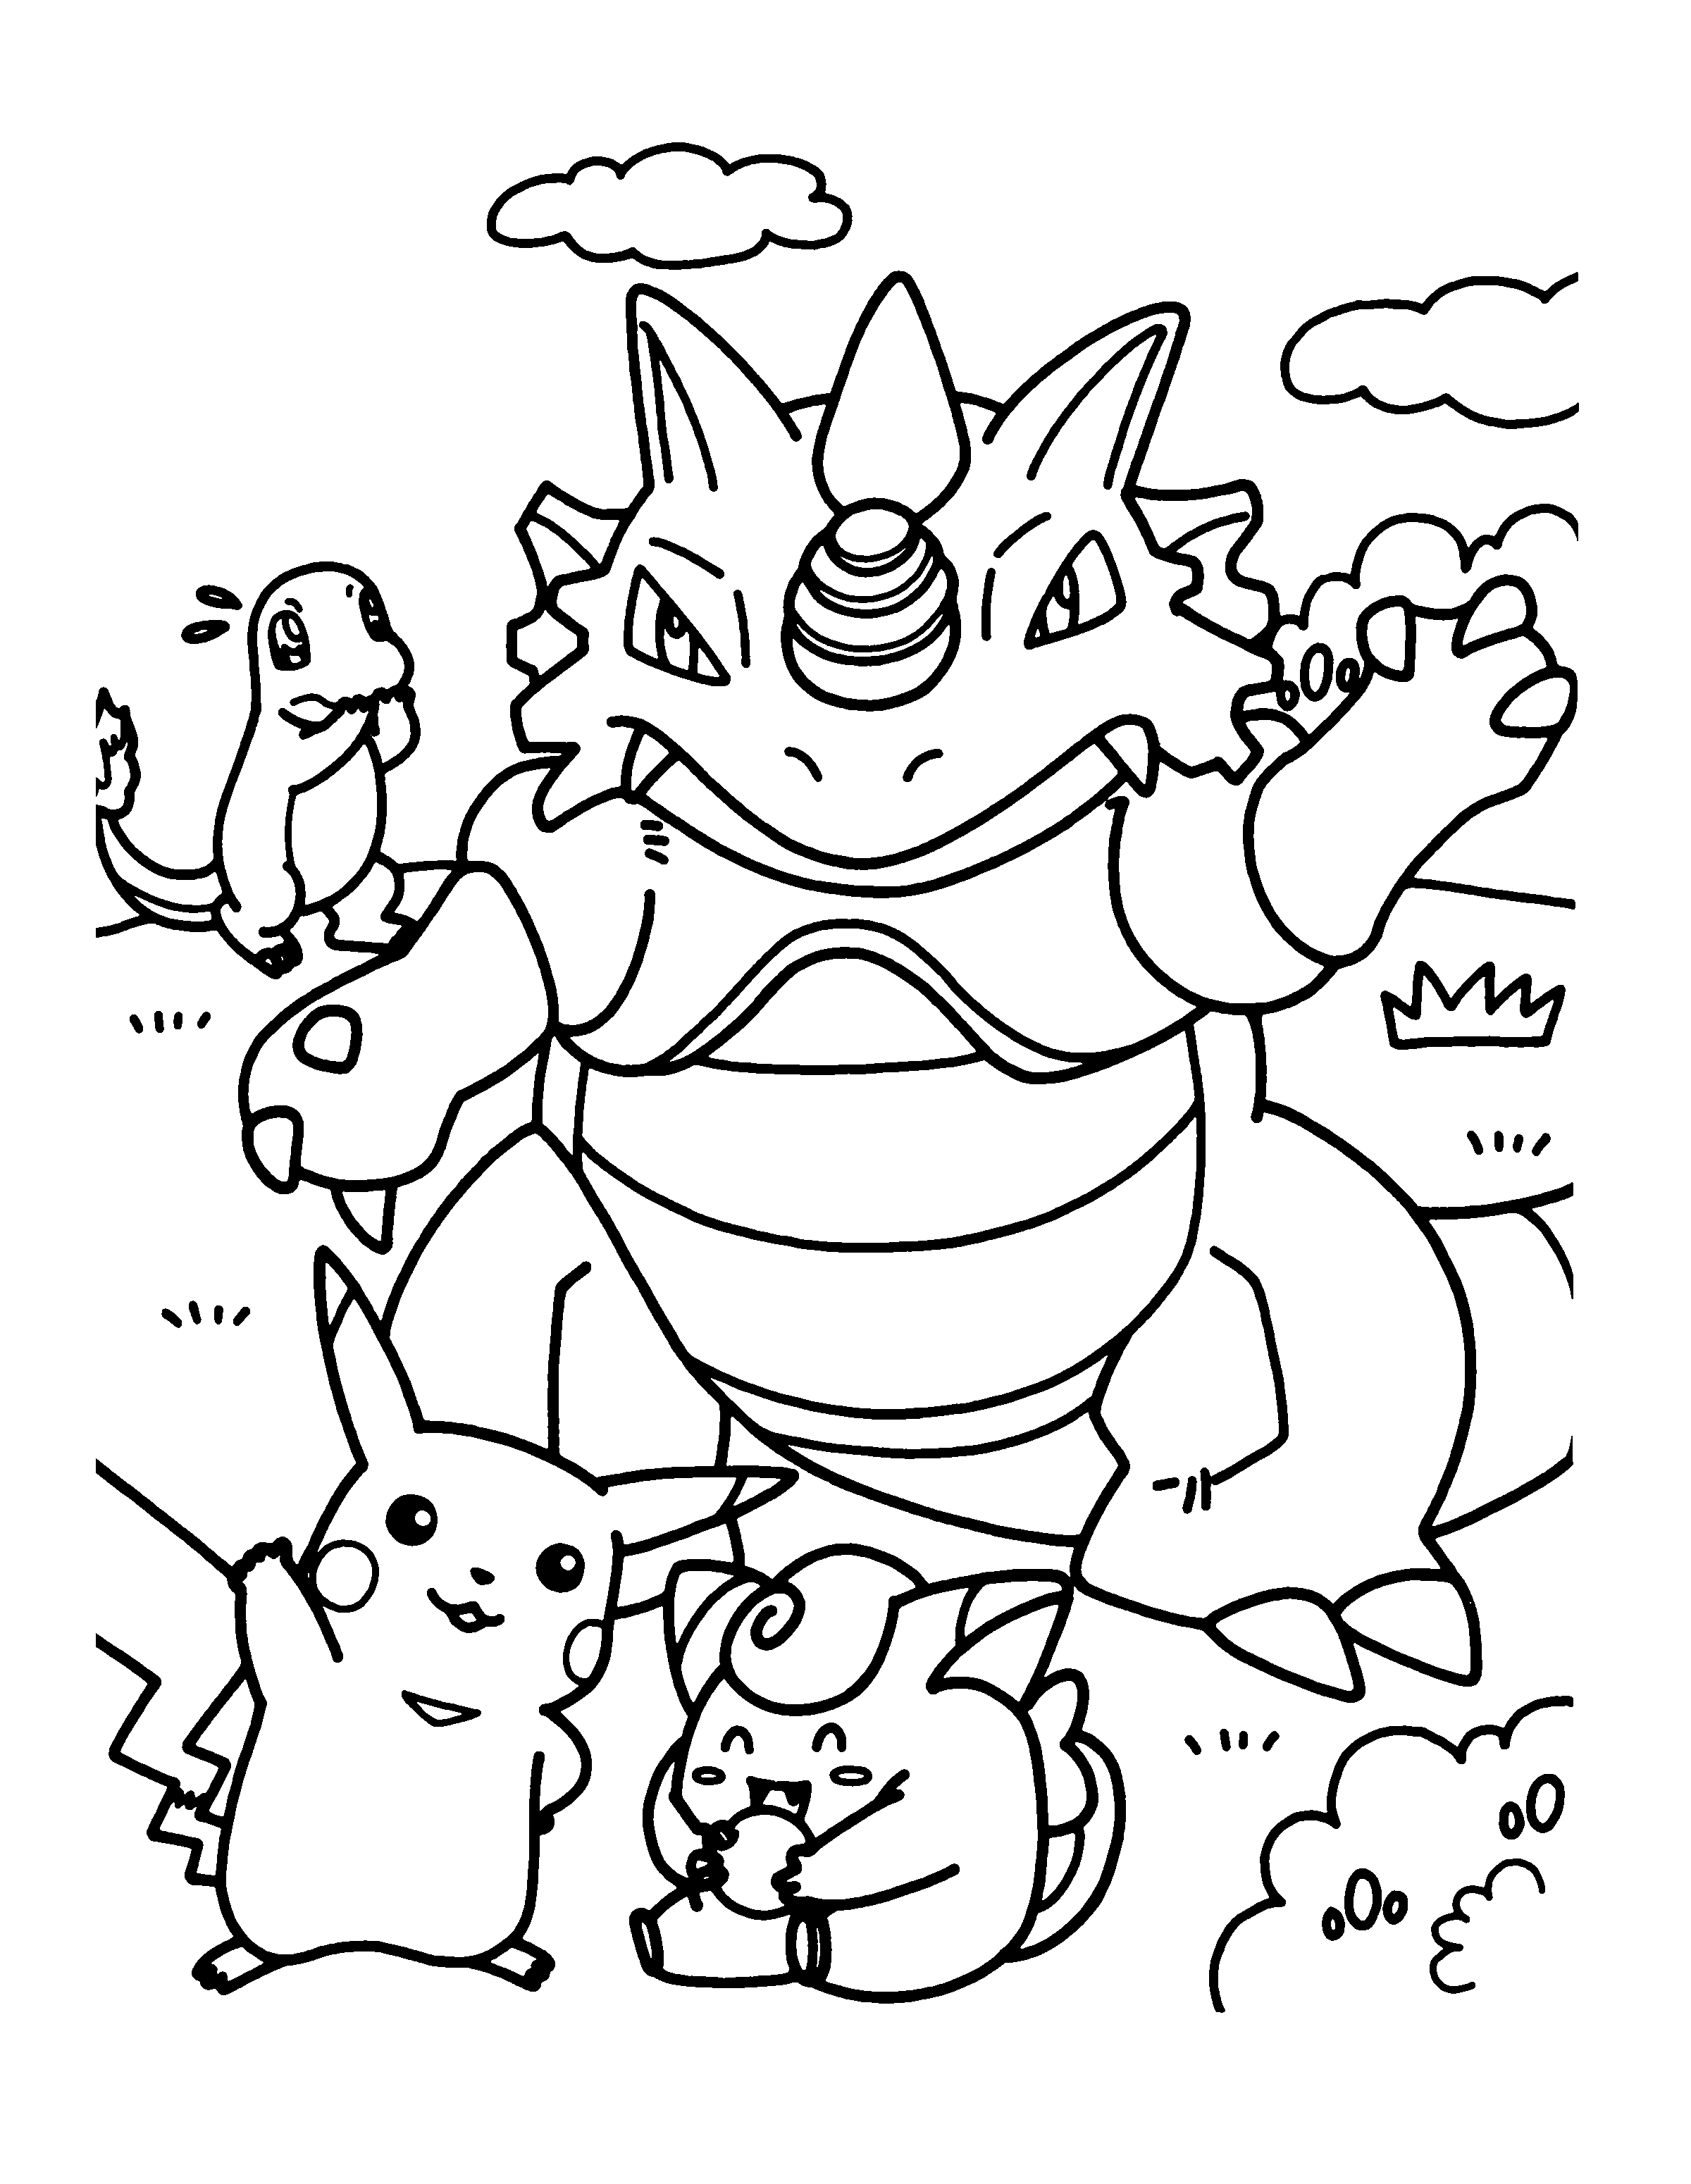 Pokemon to download - All Pokemon coloring pages Kids Coloring Pages